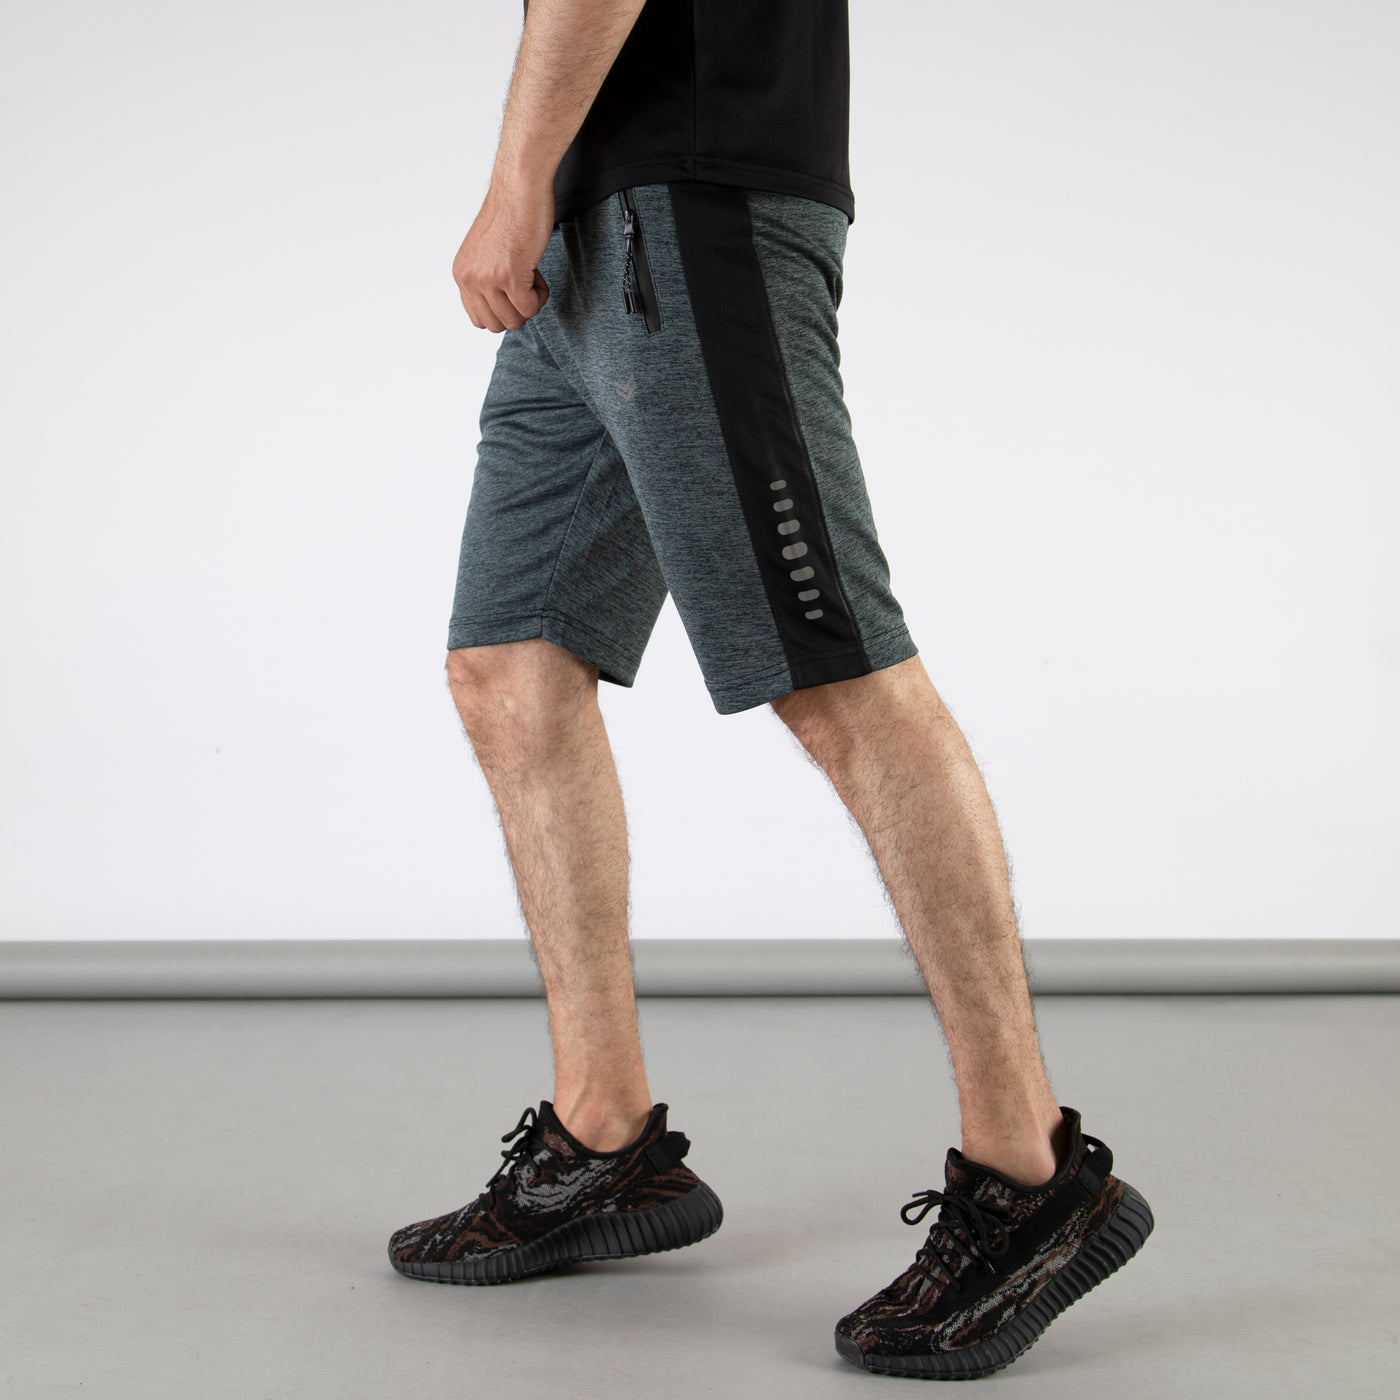 Gray Textured Quick Dry Shorts with Black Panels & Reflective Detailing